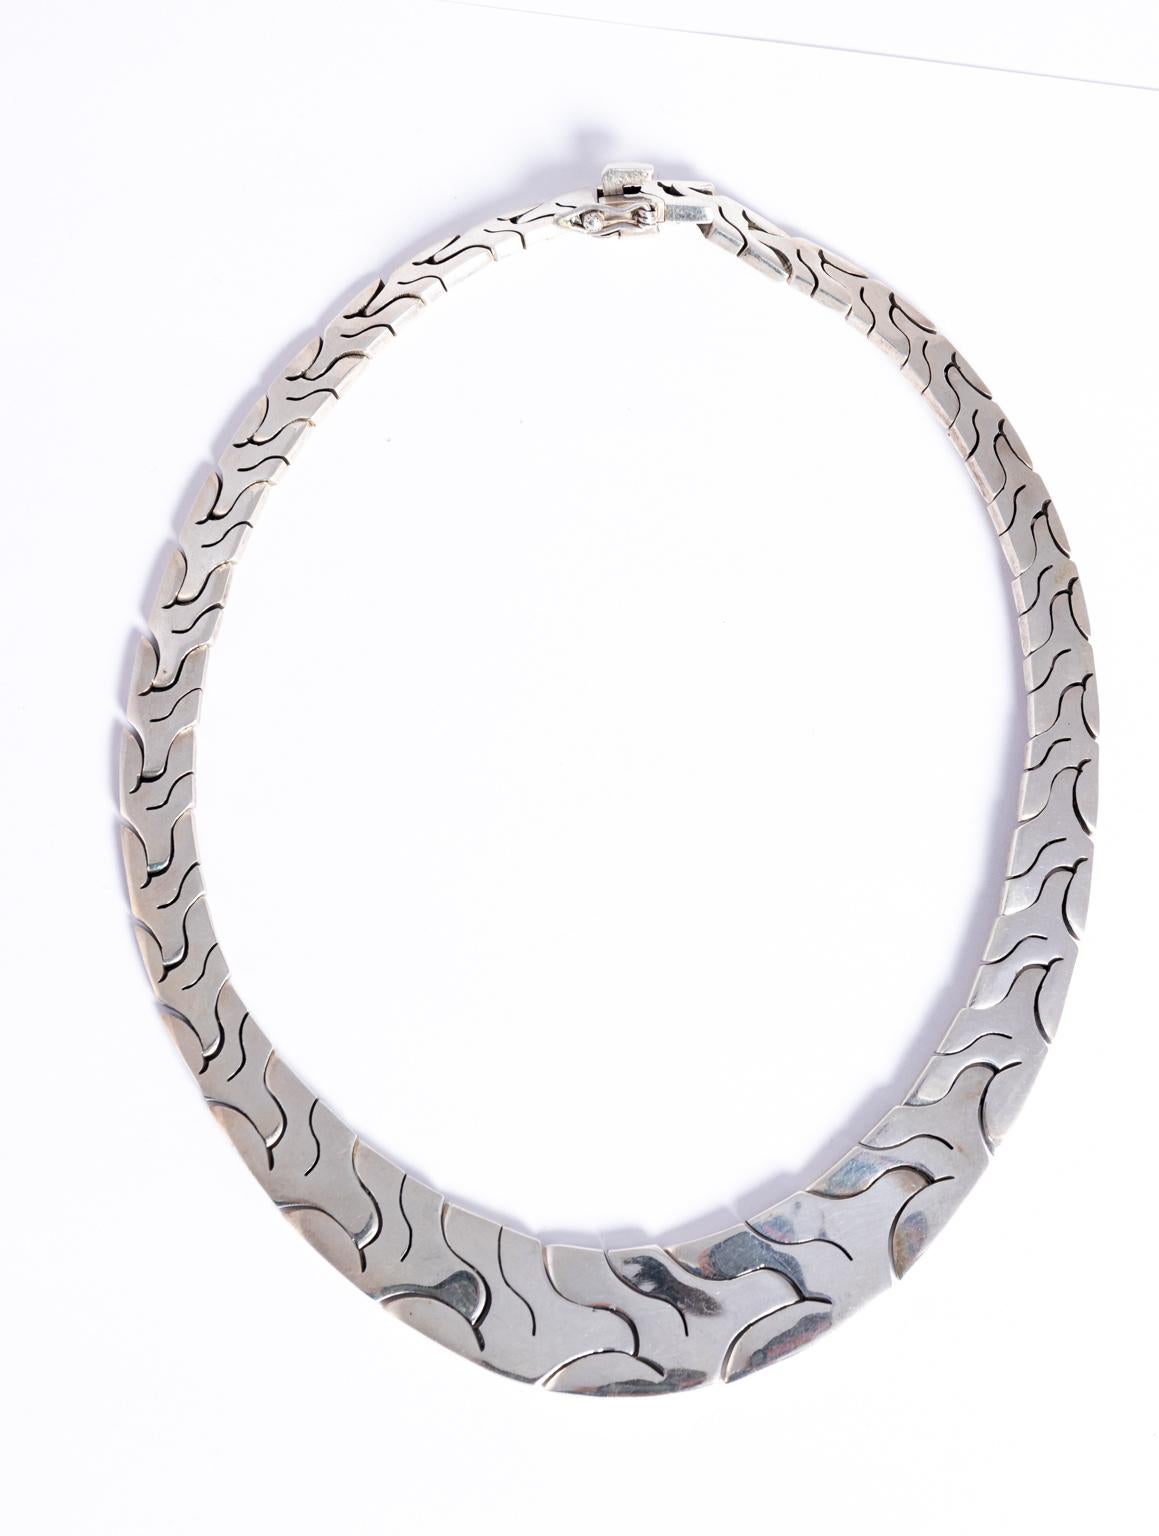 Circa 1970s handmade Sterling silver collar necklace, signed. The piece features abstract interconnecting links following a circular design from smaller in the back to larger in the center. Made in Mexico. The outside width measures 19.25 Inches,